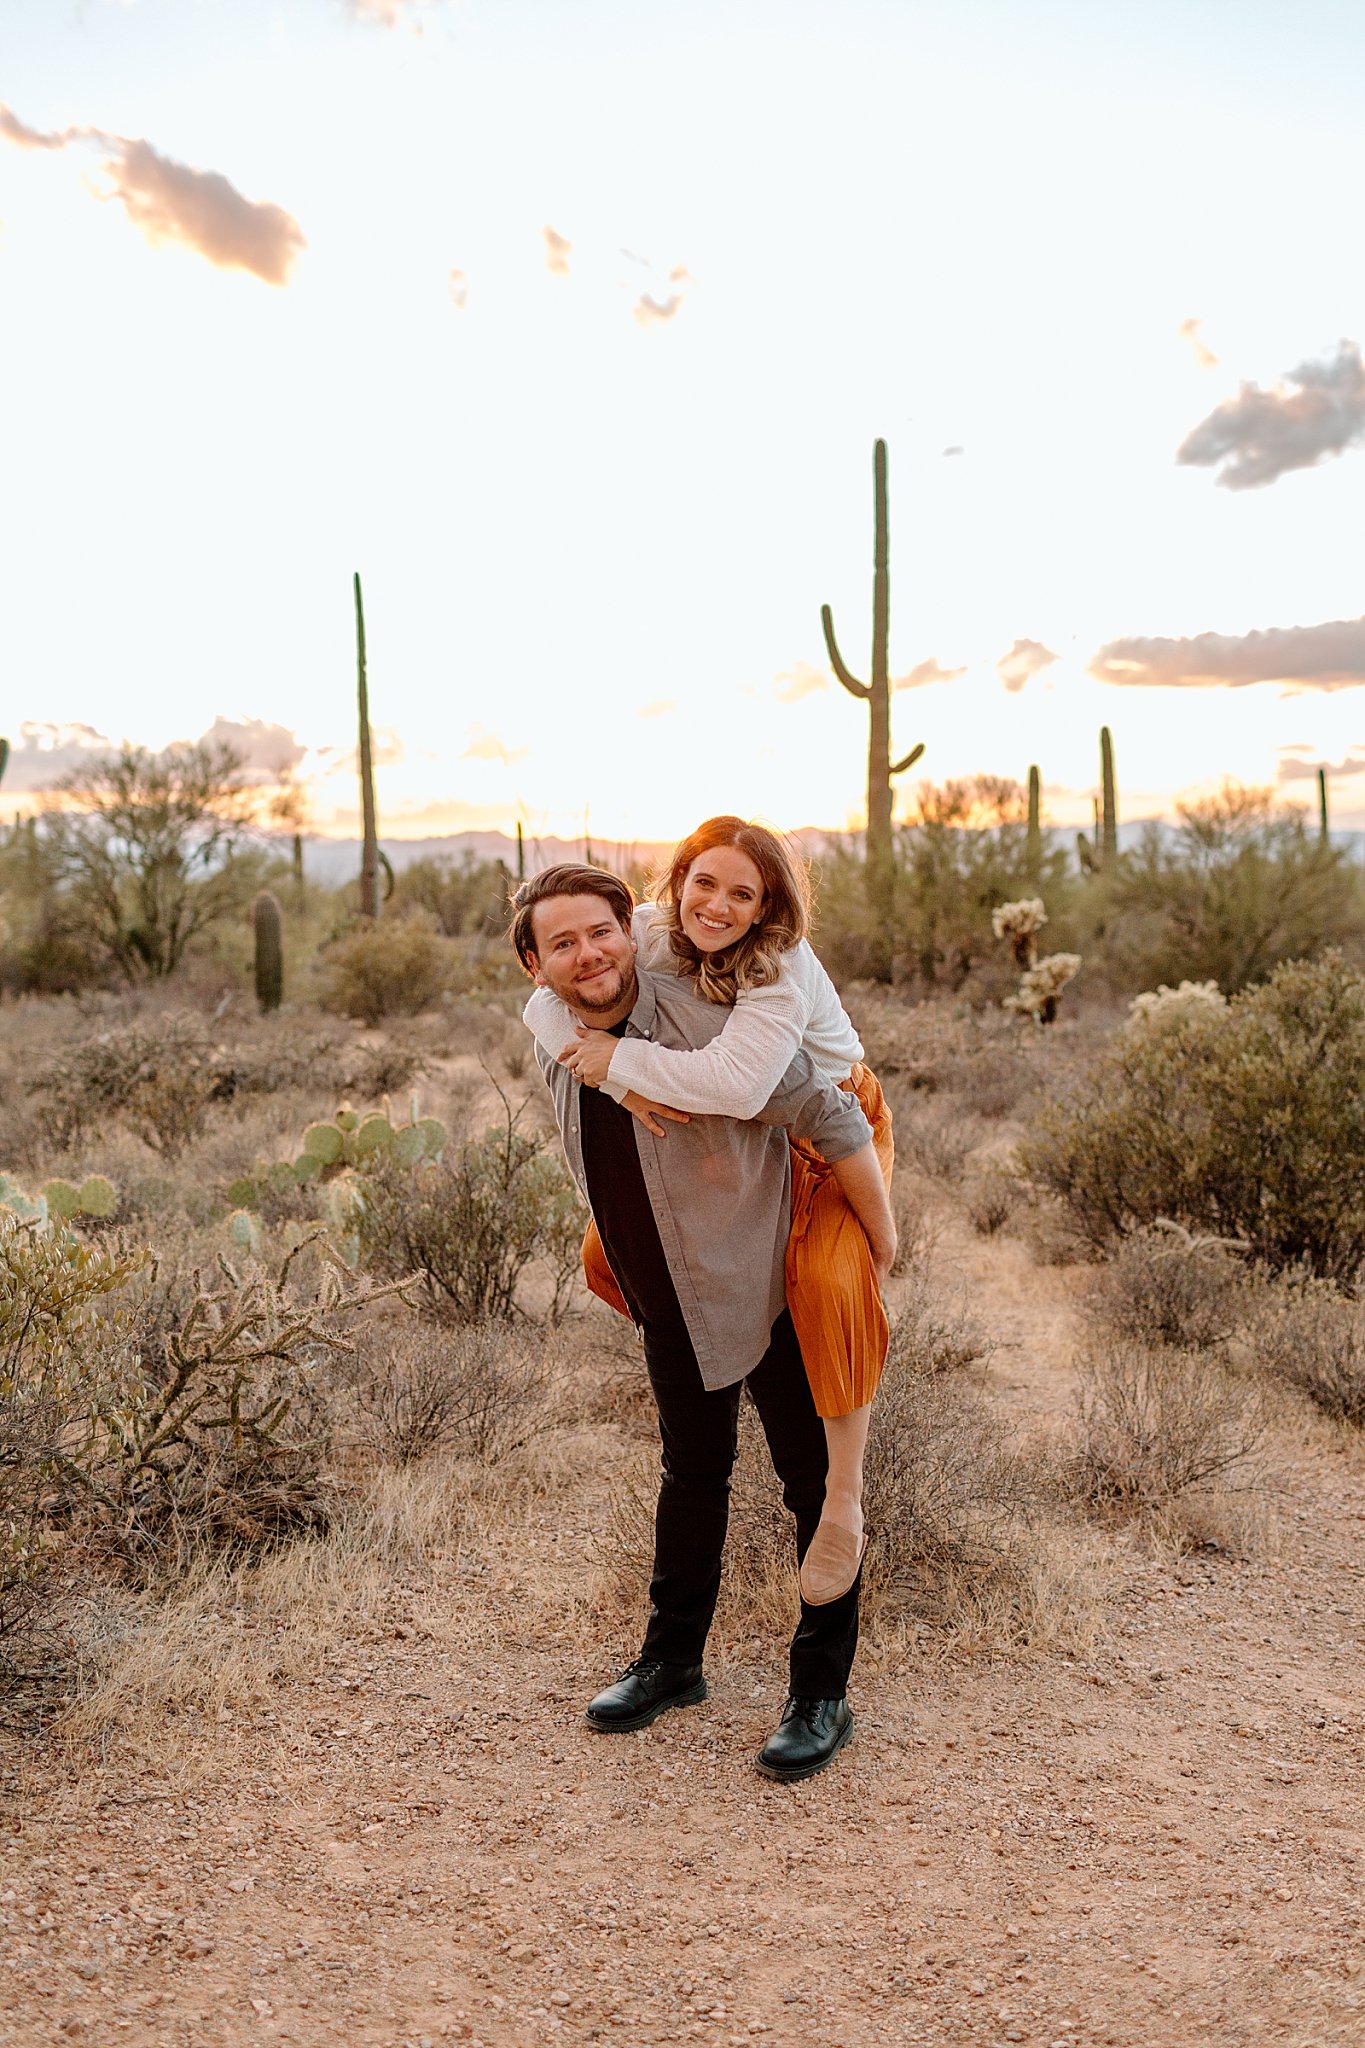  wife rides on husband’s back in desert for Arizona Couples Photographer 